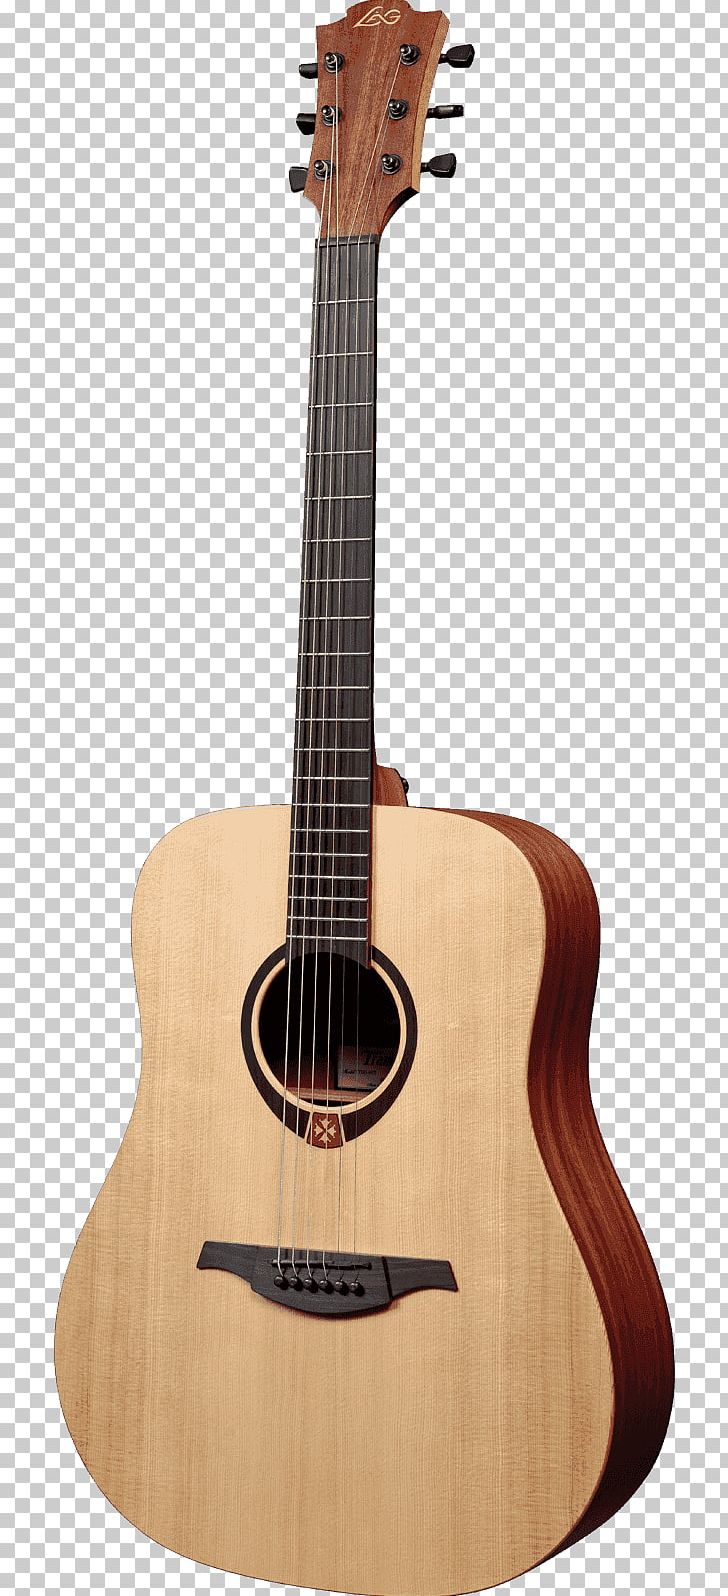 Acoustic Guitar Fender Musical Instruments Corporation Acoustic-electric Guitar Cutaway PNG, Clipart, Acoustic Electric Guitar, Classical Guitar, Cuatro, Cutaway, Guitar Accessory Free PNG Download